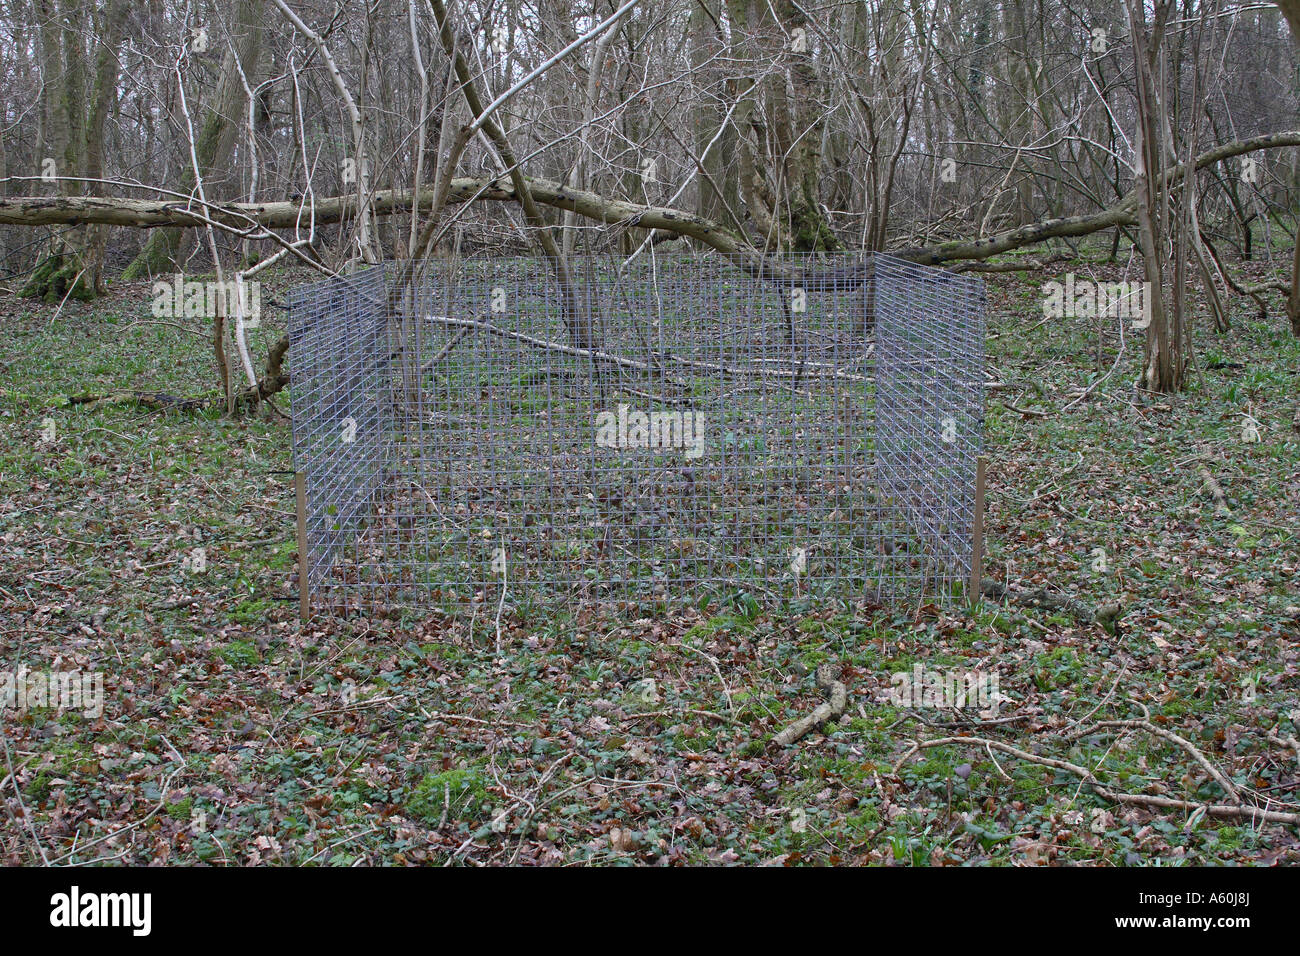 WIRE CAGE USED TO PROTECT RARE PLANTS FROM DEER AND RABBITS IN ...